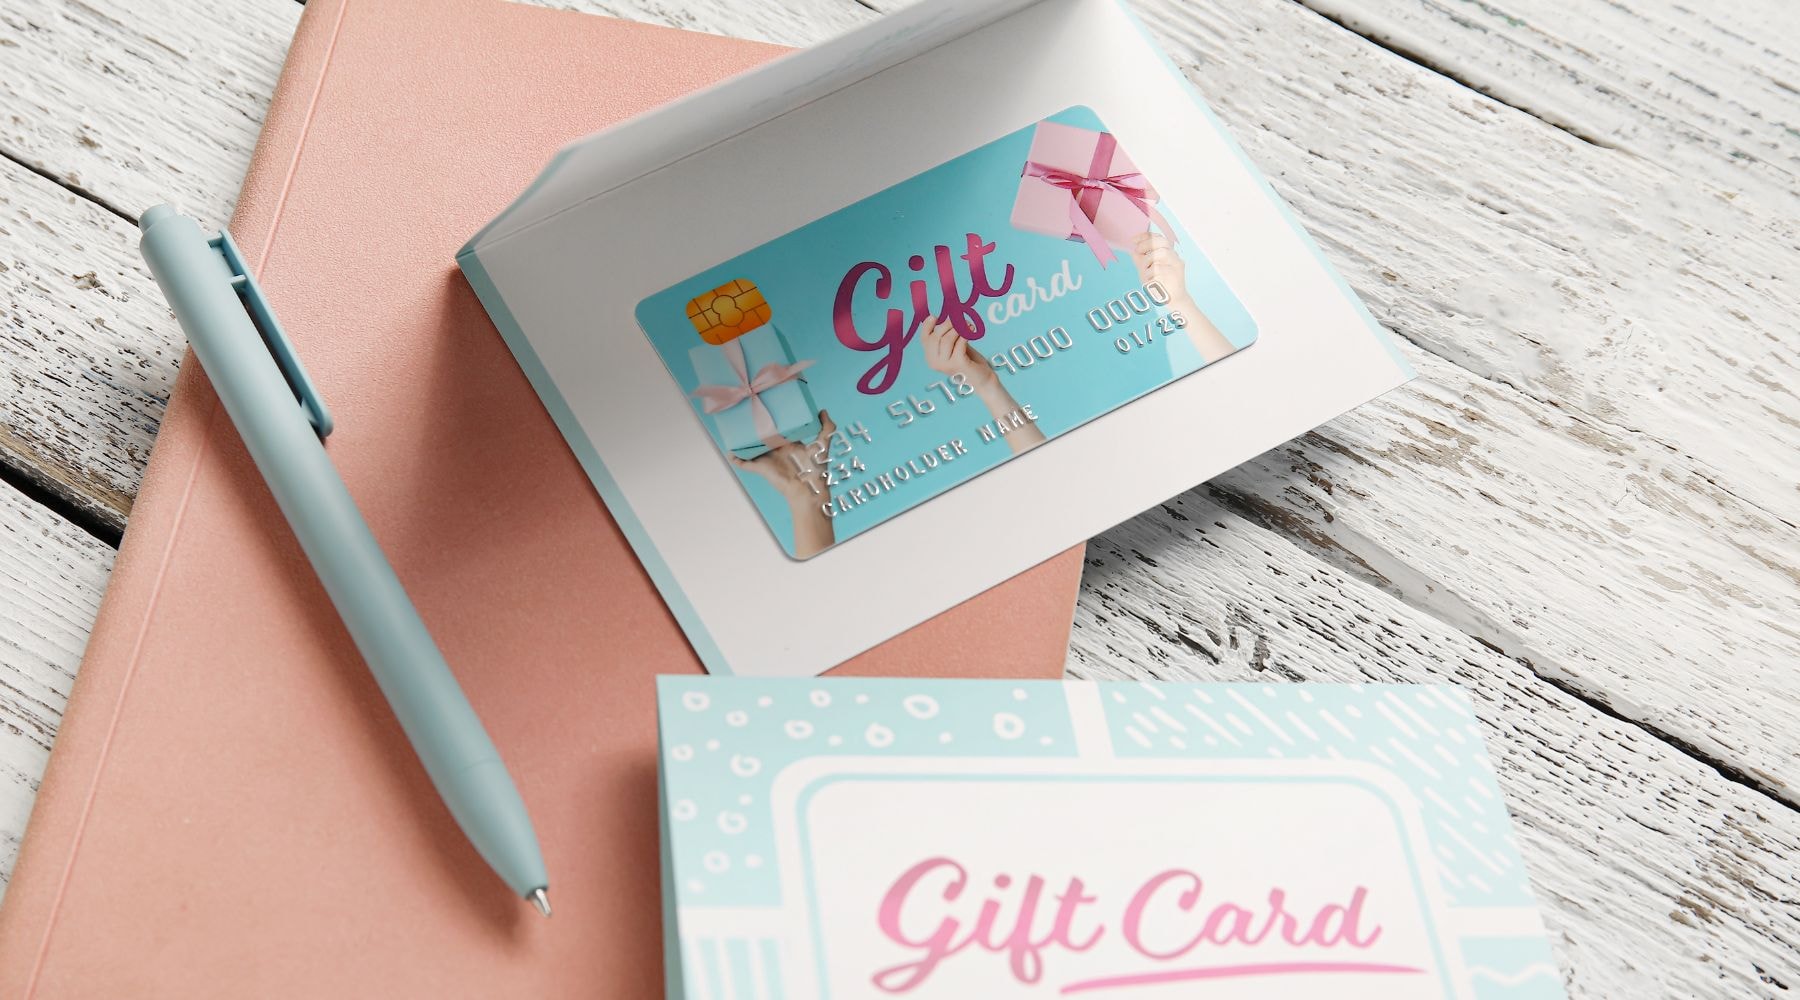 Gift card on a pink notebook, symbolizing thoughtful gifting options.